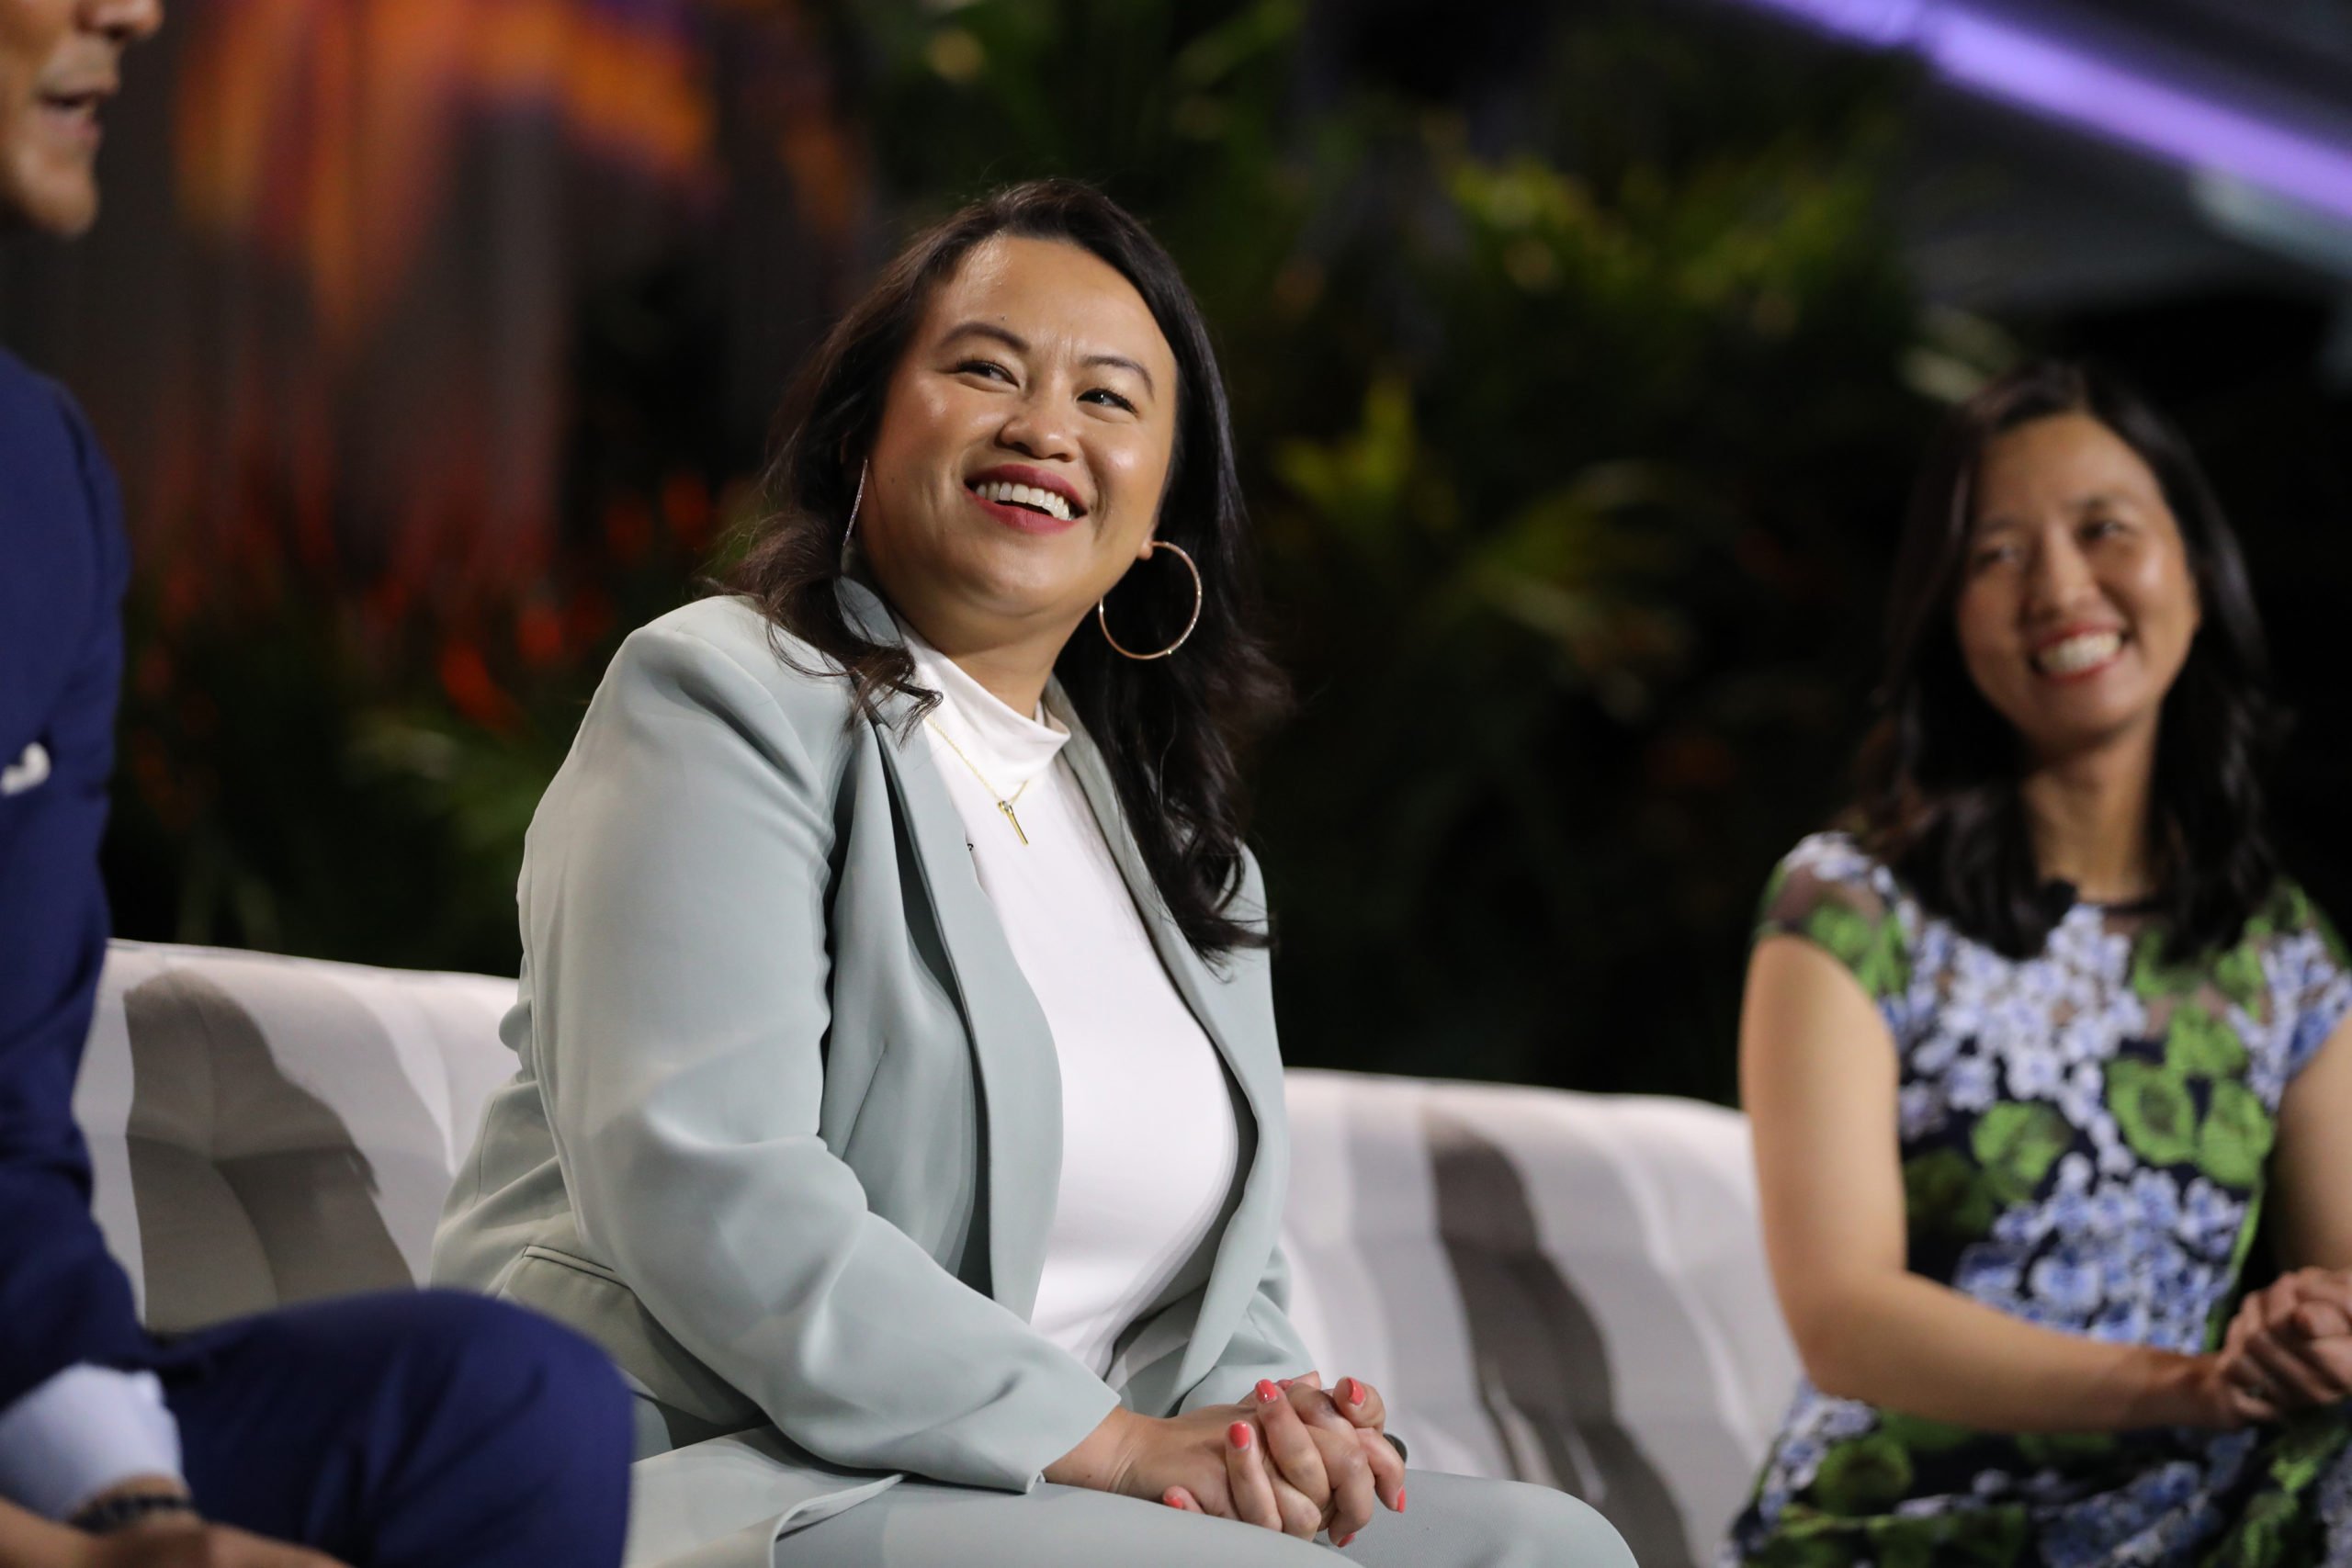 NEW YORK, NEW YORK - MAY 02: (L-R) Sheng Thao and Michelle Wu speak onstage at the TAAF Heritage Month Summit at The Glasshouse on May 02, 2024 in New York City. (Photo by JP Yim/Getty Images for The Asian American Foundation)